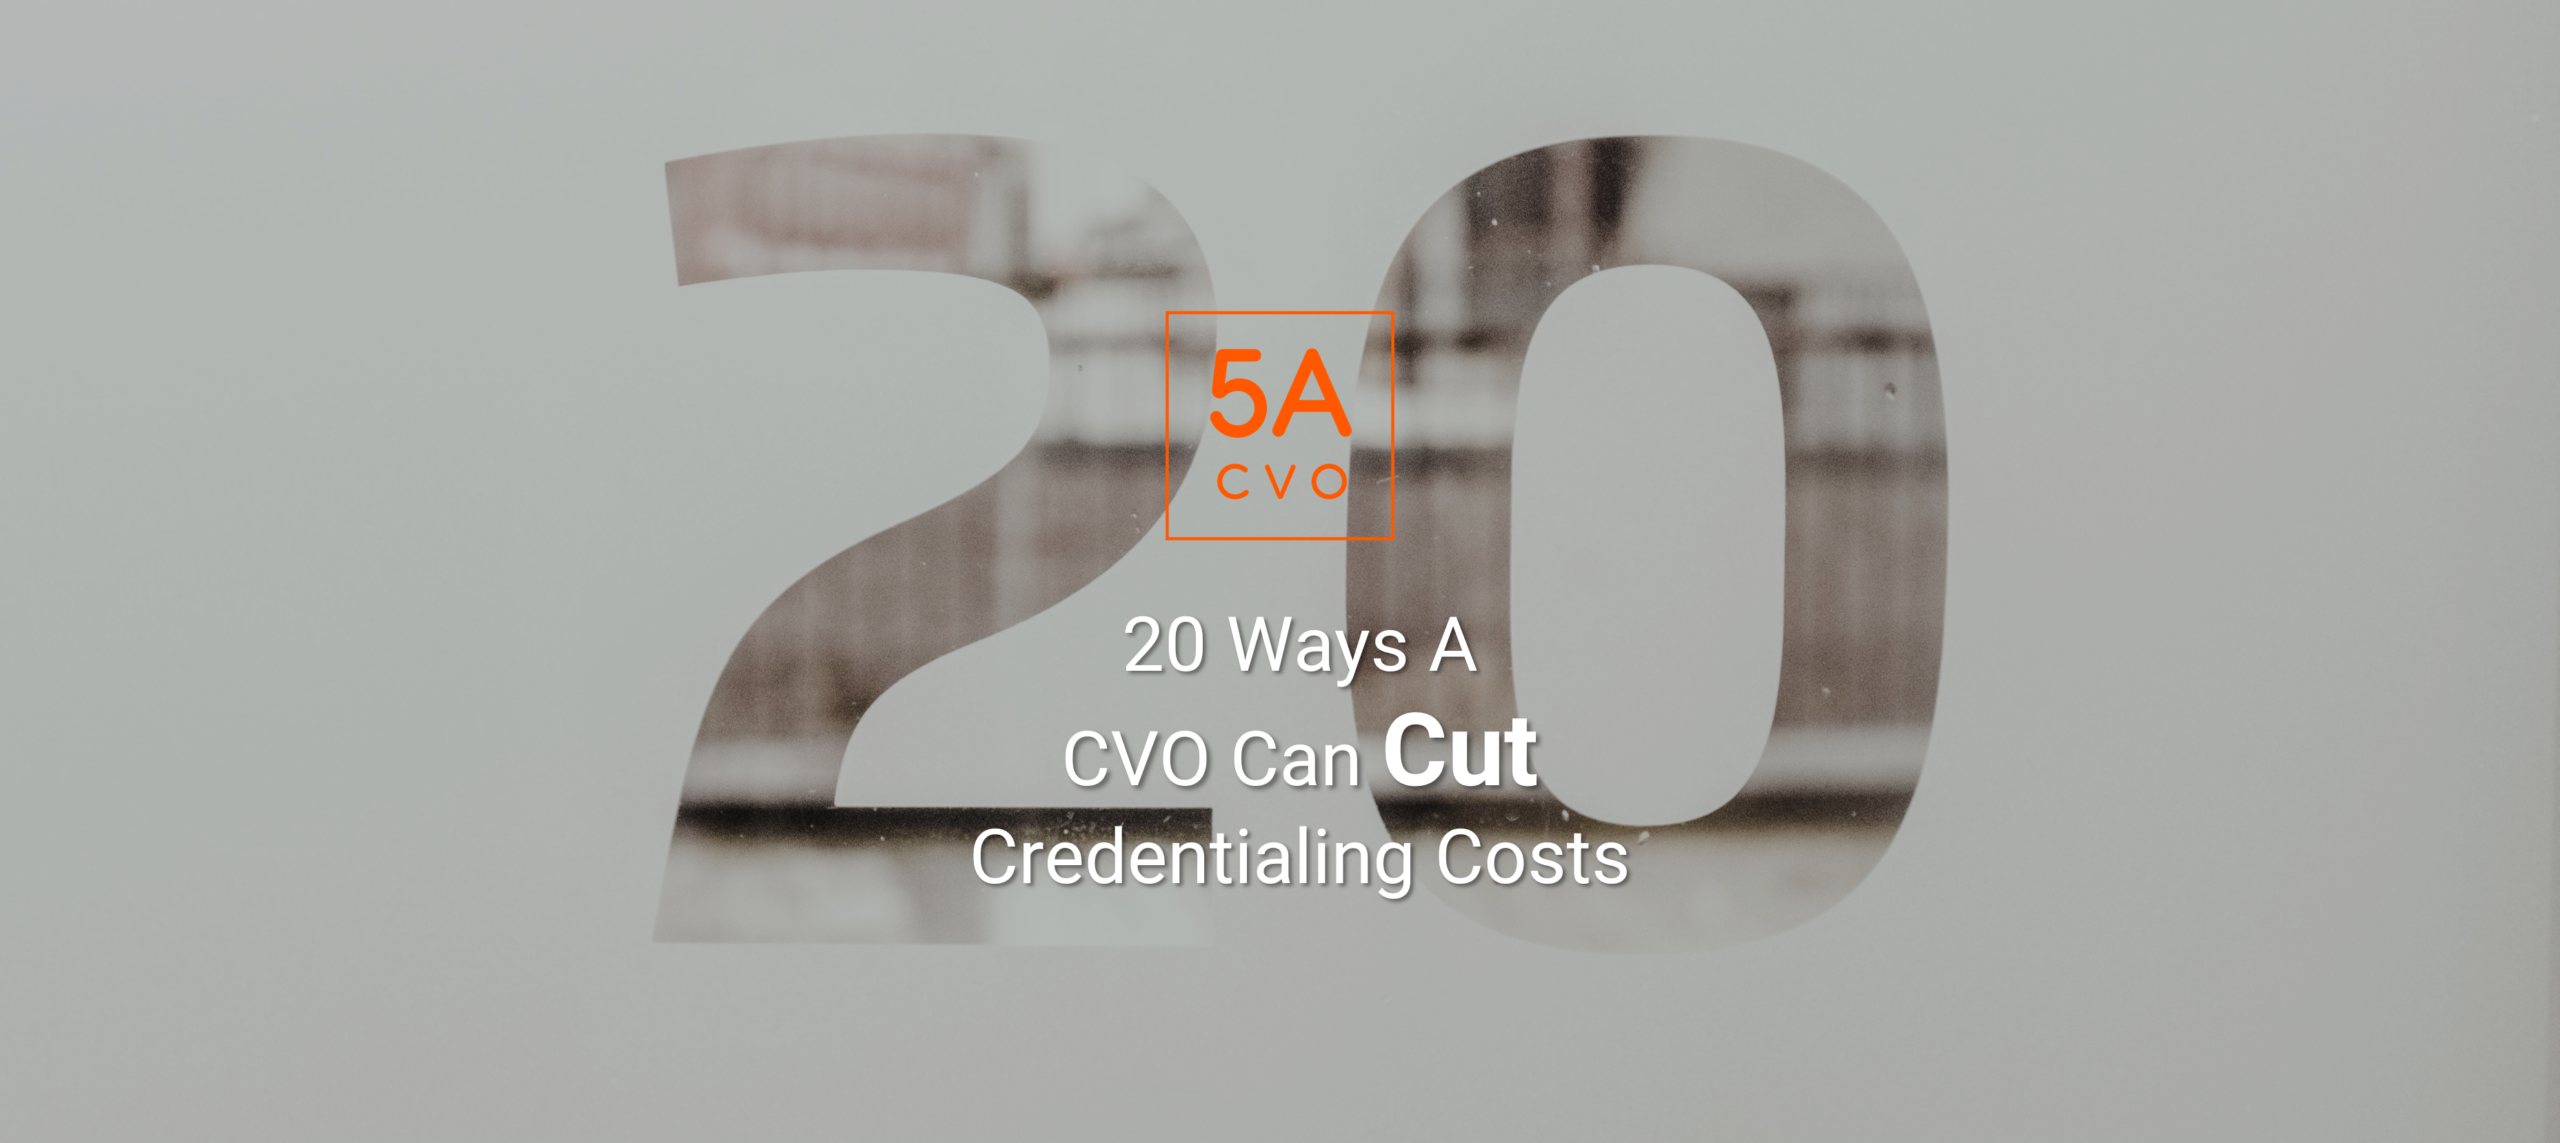 20 Ways A Cvo Can Cut Credentialing Costs